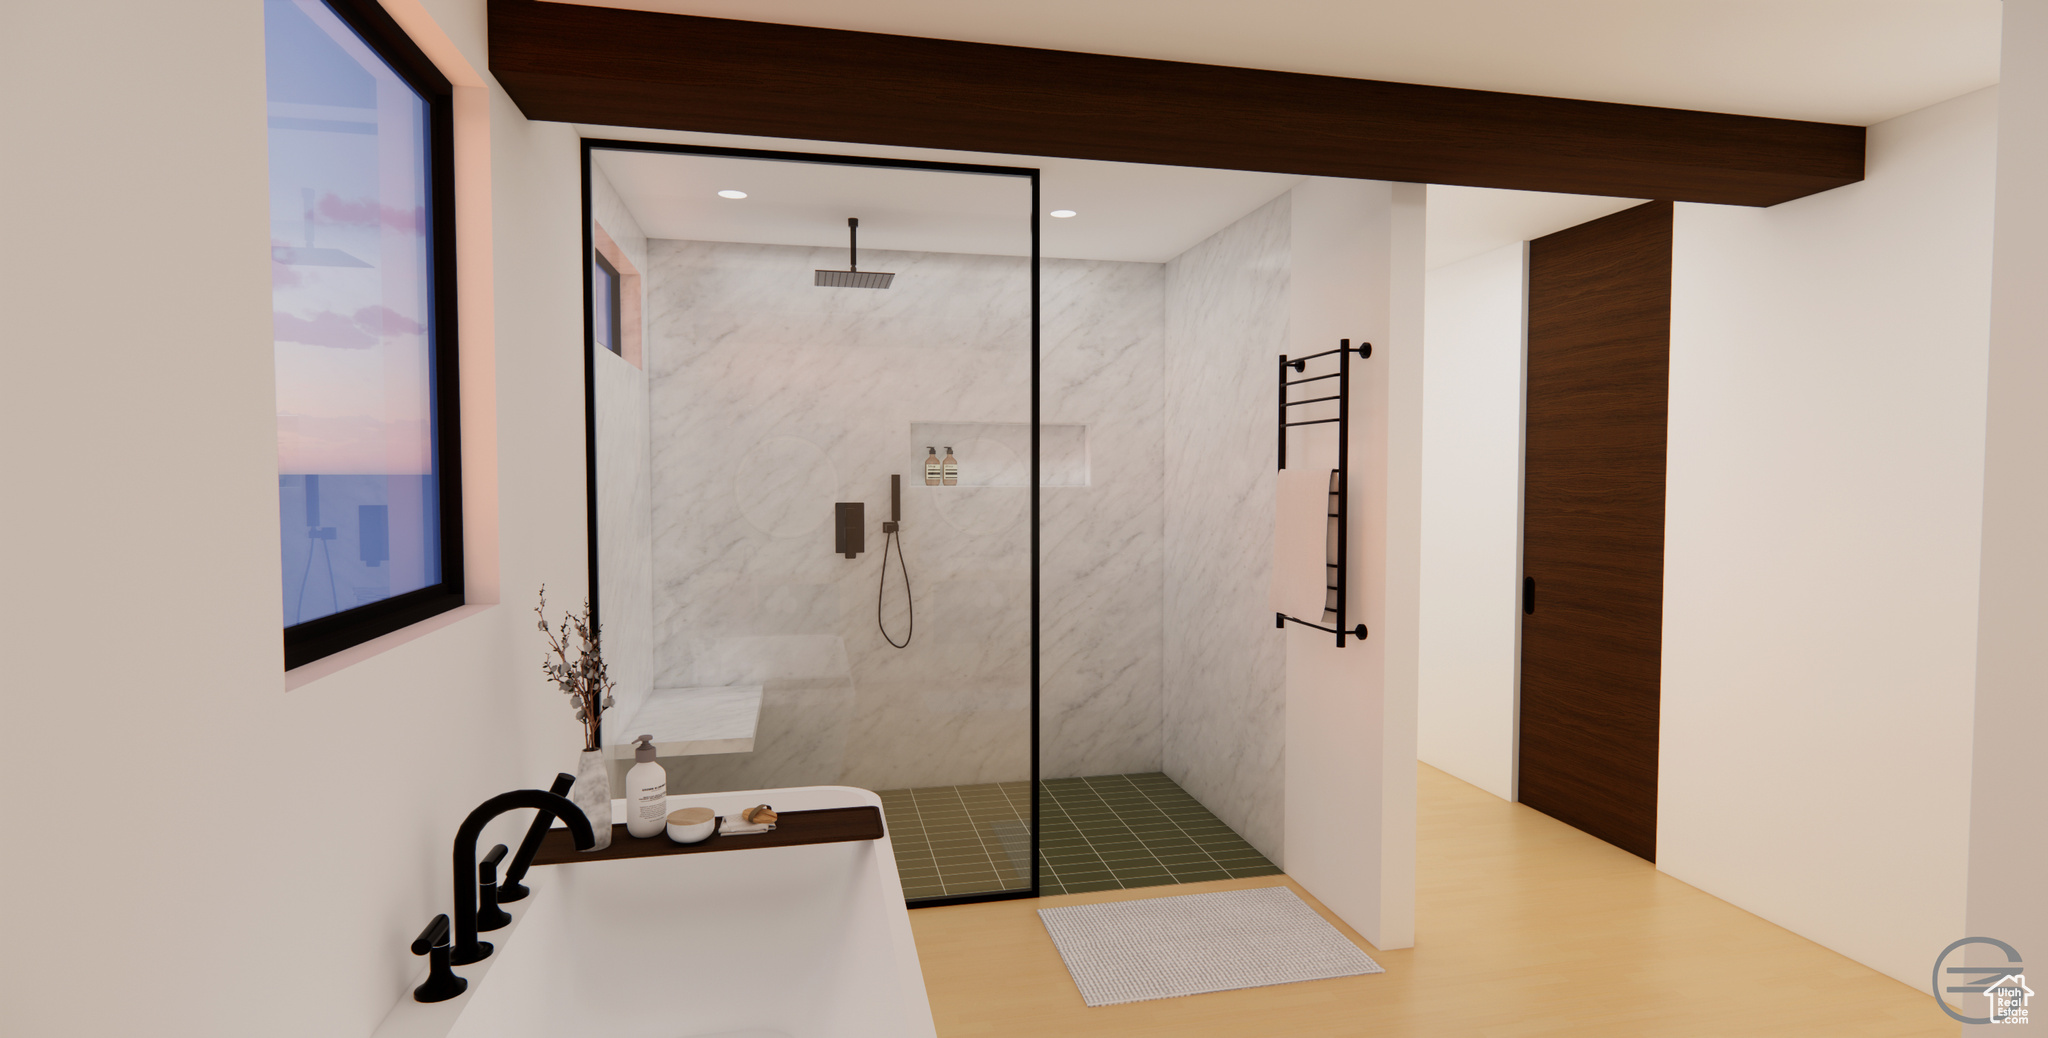 Bathroom featuring tub and a tile shower - RENDERING